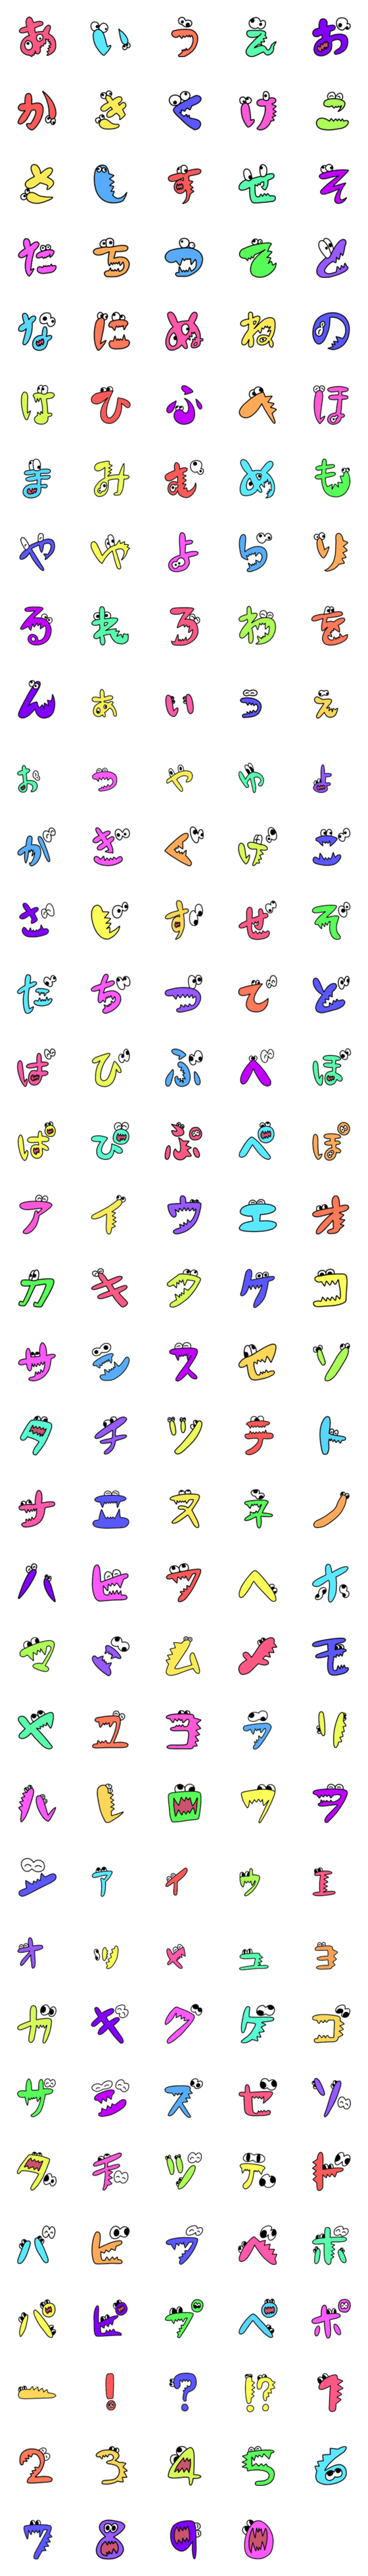 [LINE絵文字]モンスター絵文字byMamaの画像一覧